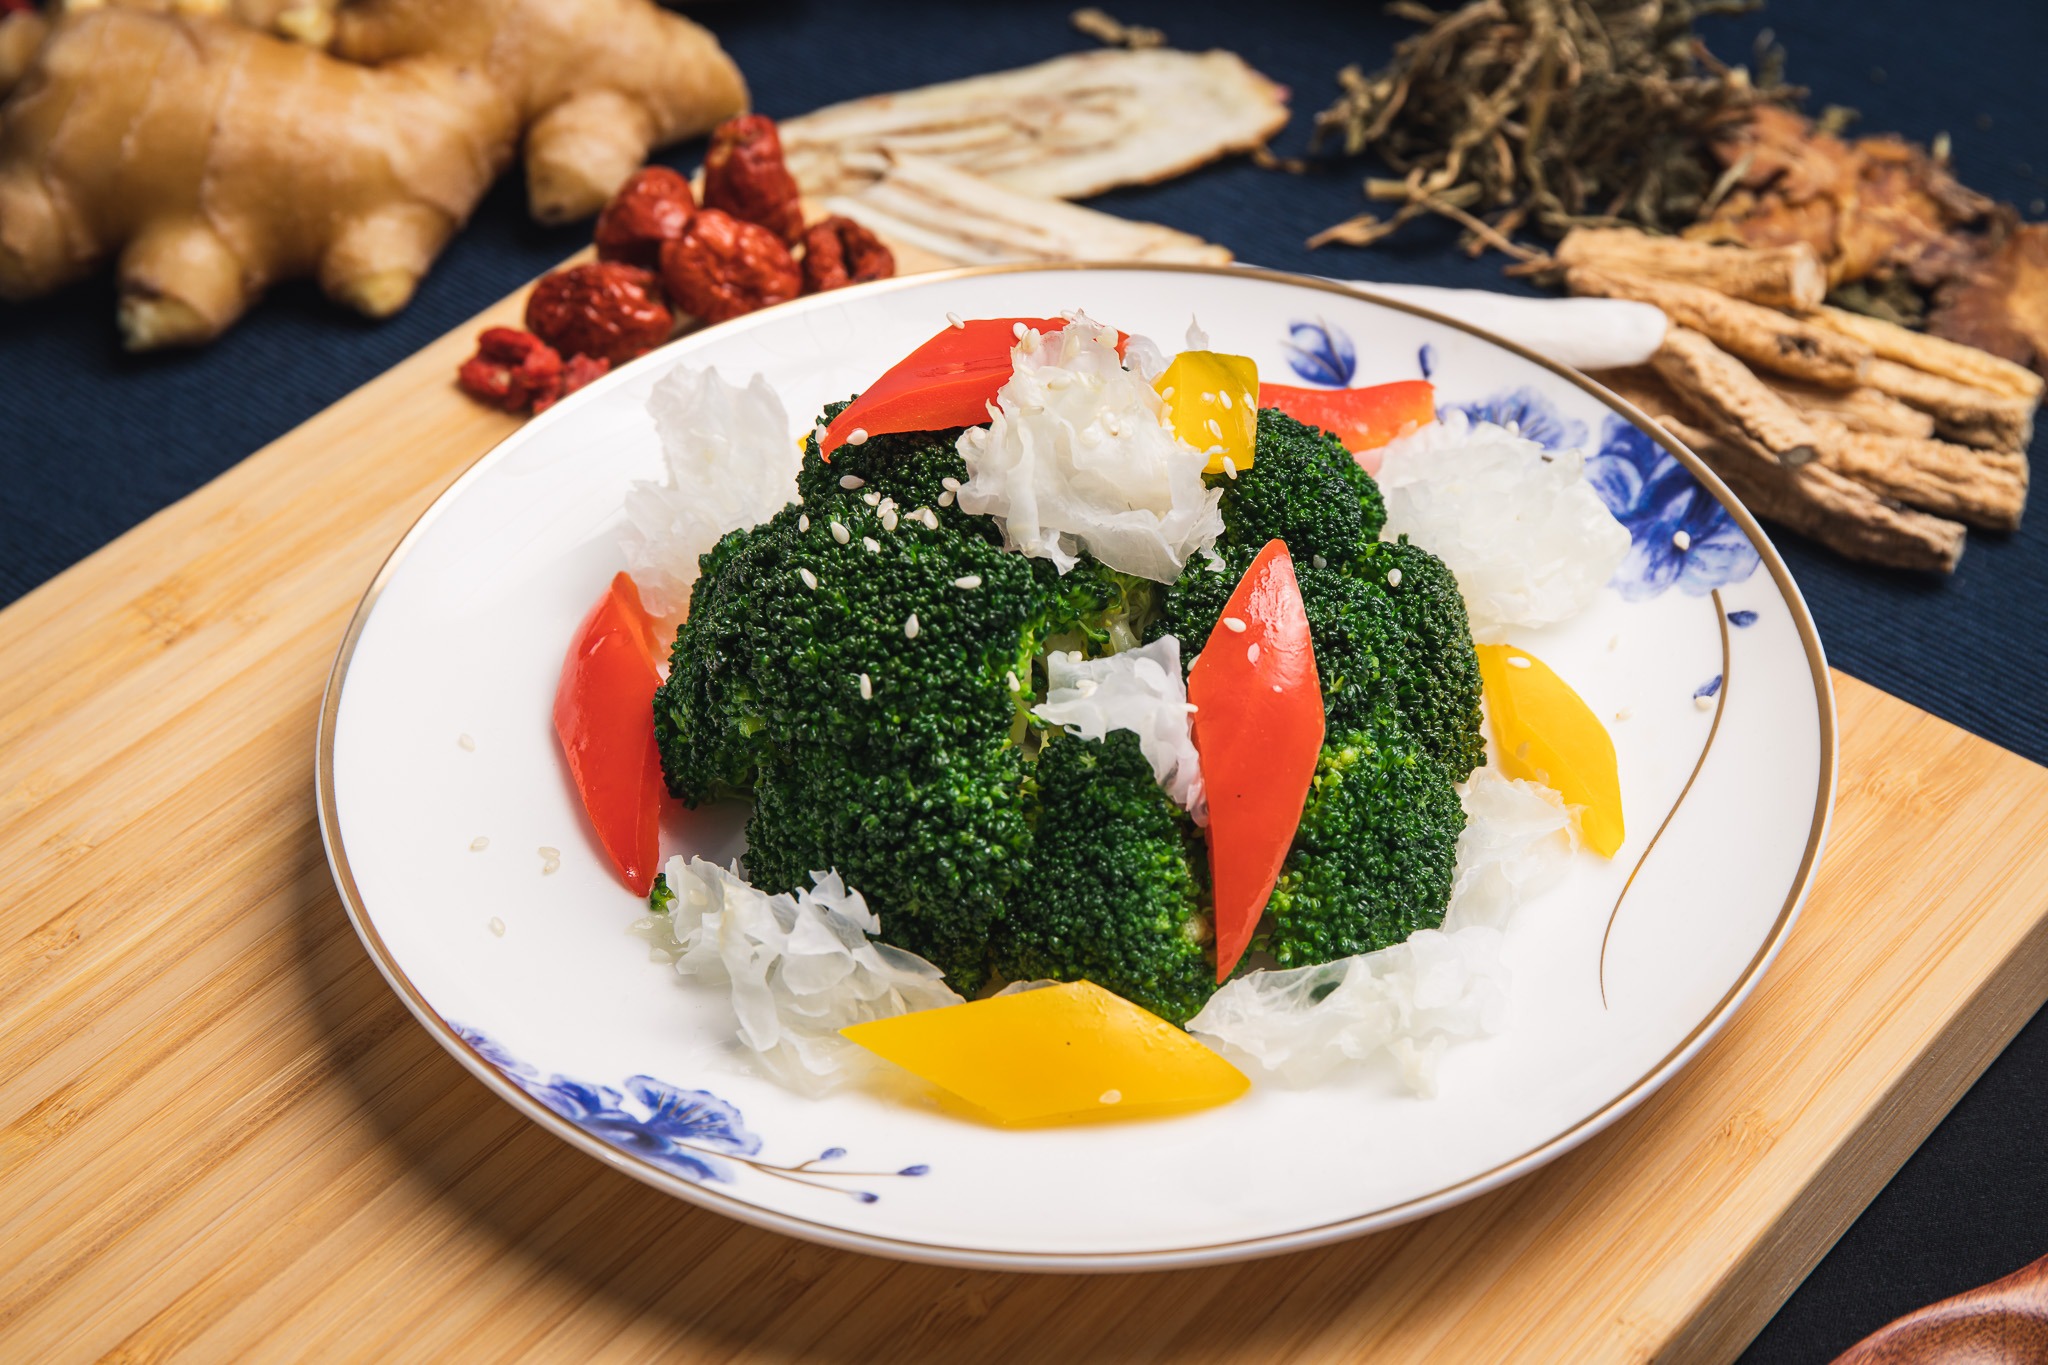 Stir-Fried Broccoli with White Fungus and Capsicum